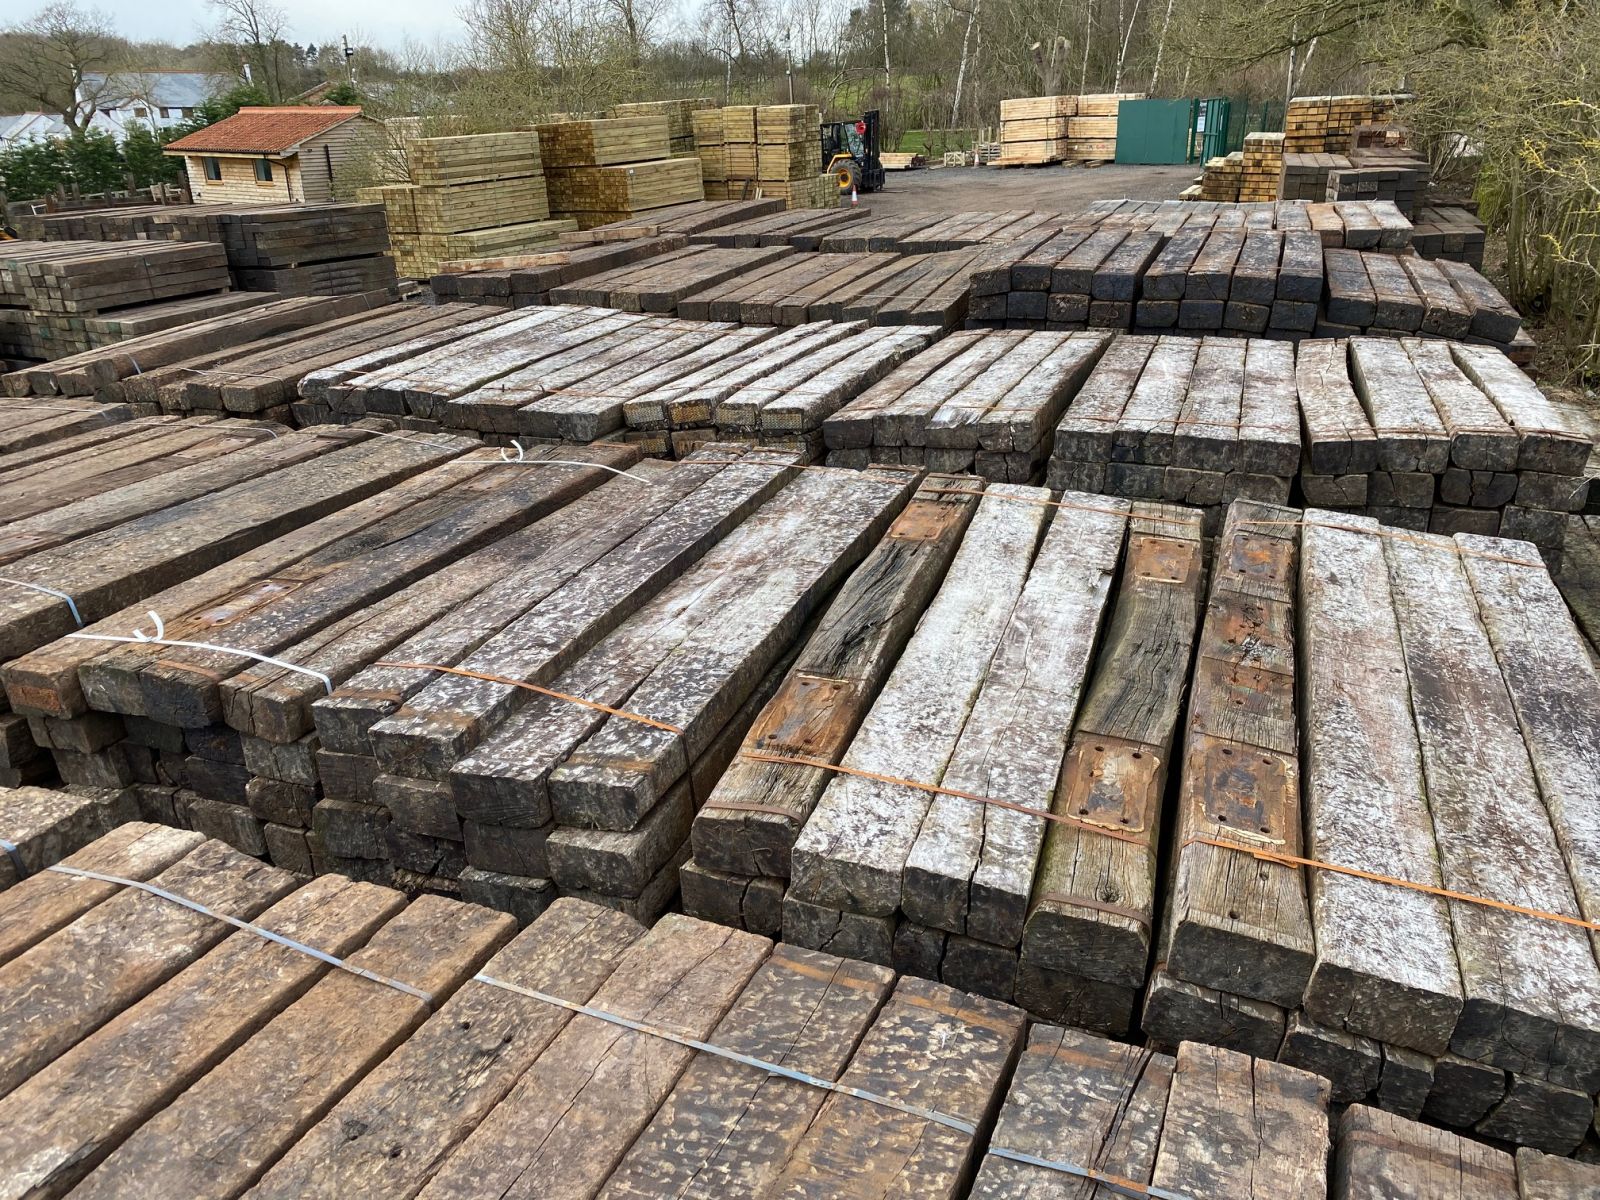 Our railway sleeper yard is full of many different types of new and used railway sleepers. Railwaysleepers.com 